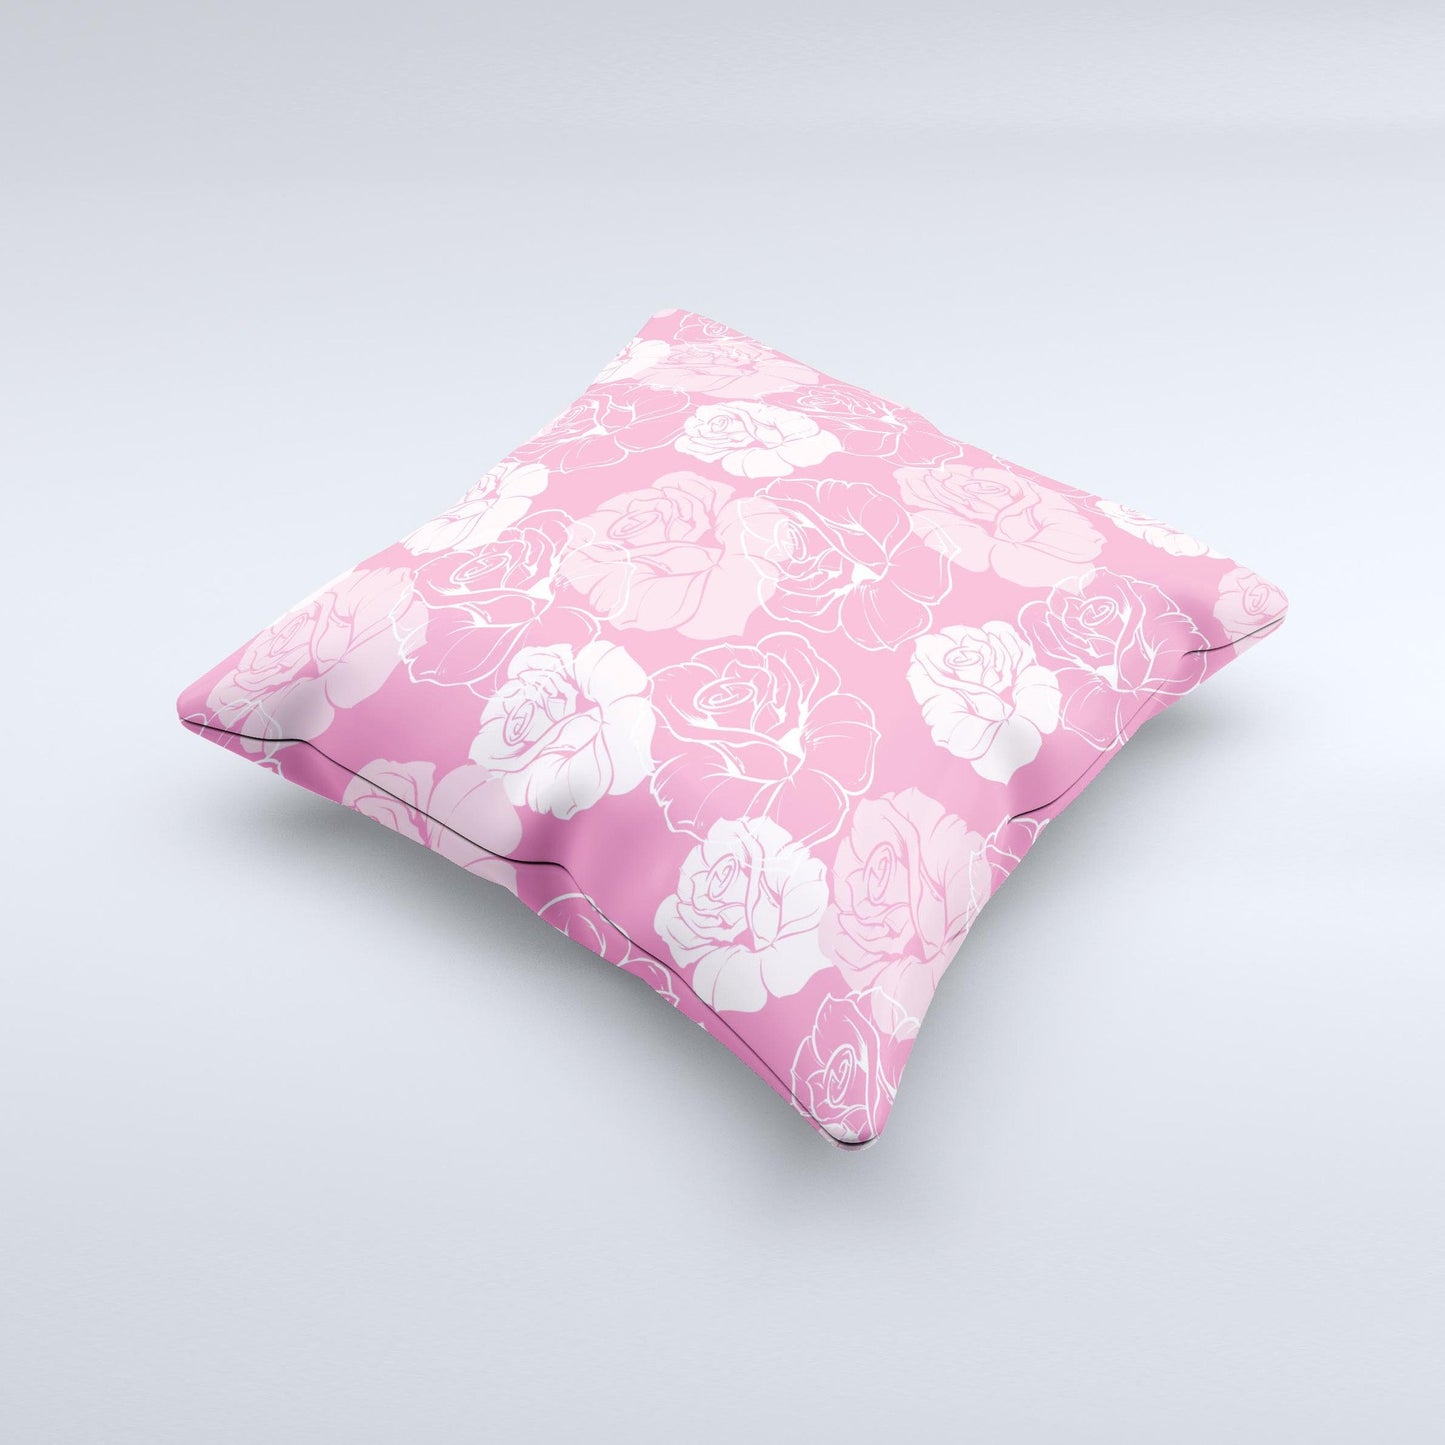 Subtle Pinks Rose Pattern V3 ink-Fuzed Decorative Throw Pillow